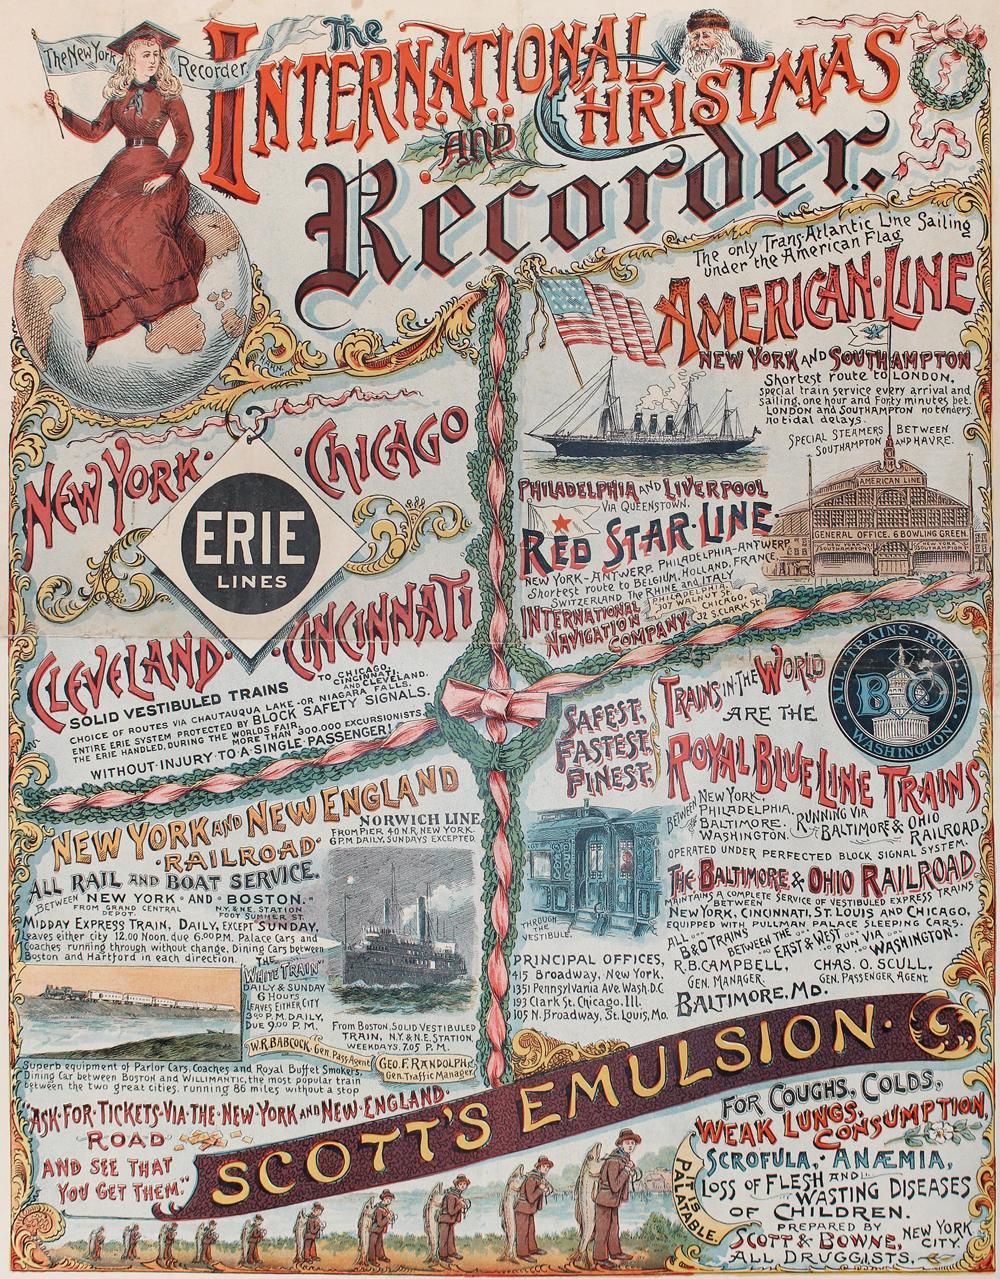 The New York Recorder was a newspaper that was published in New York City during the late 19th and early 20th centuries. It was one of many papers that served the New York metropolitan area during a time when newspapers were a primary source of news